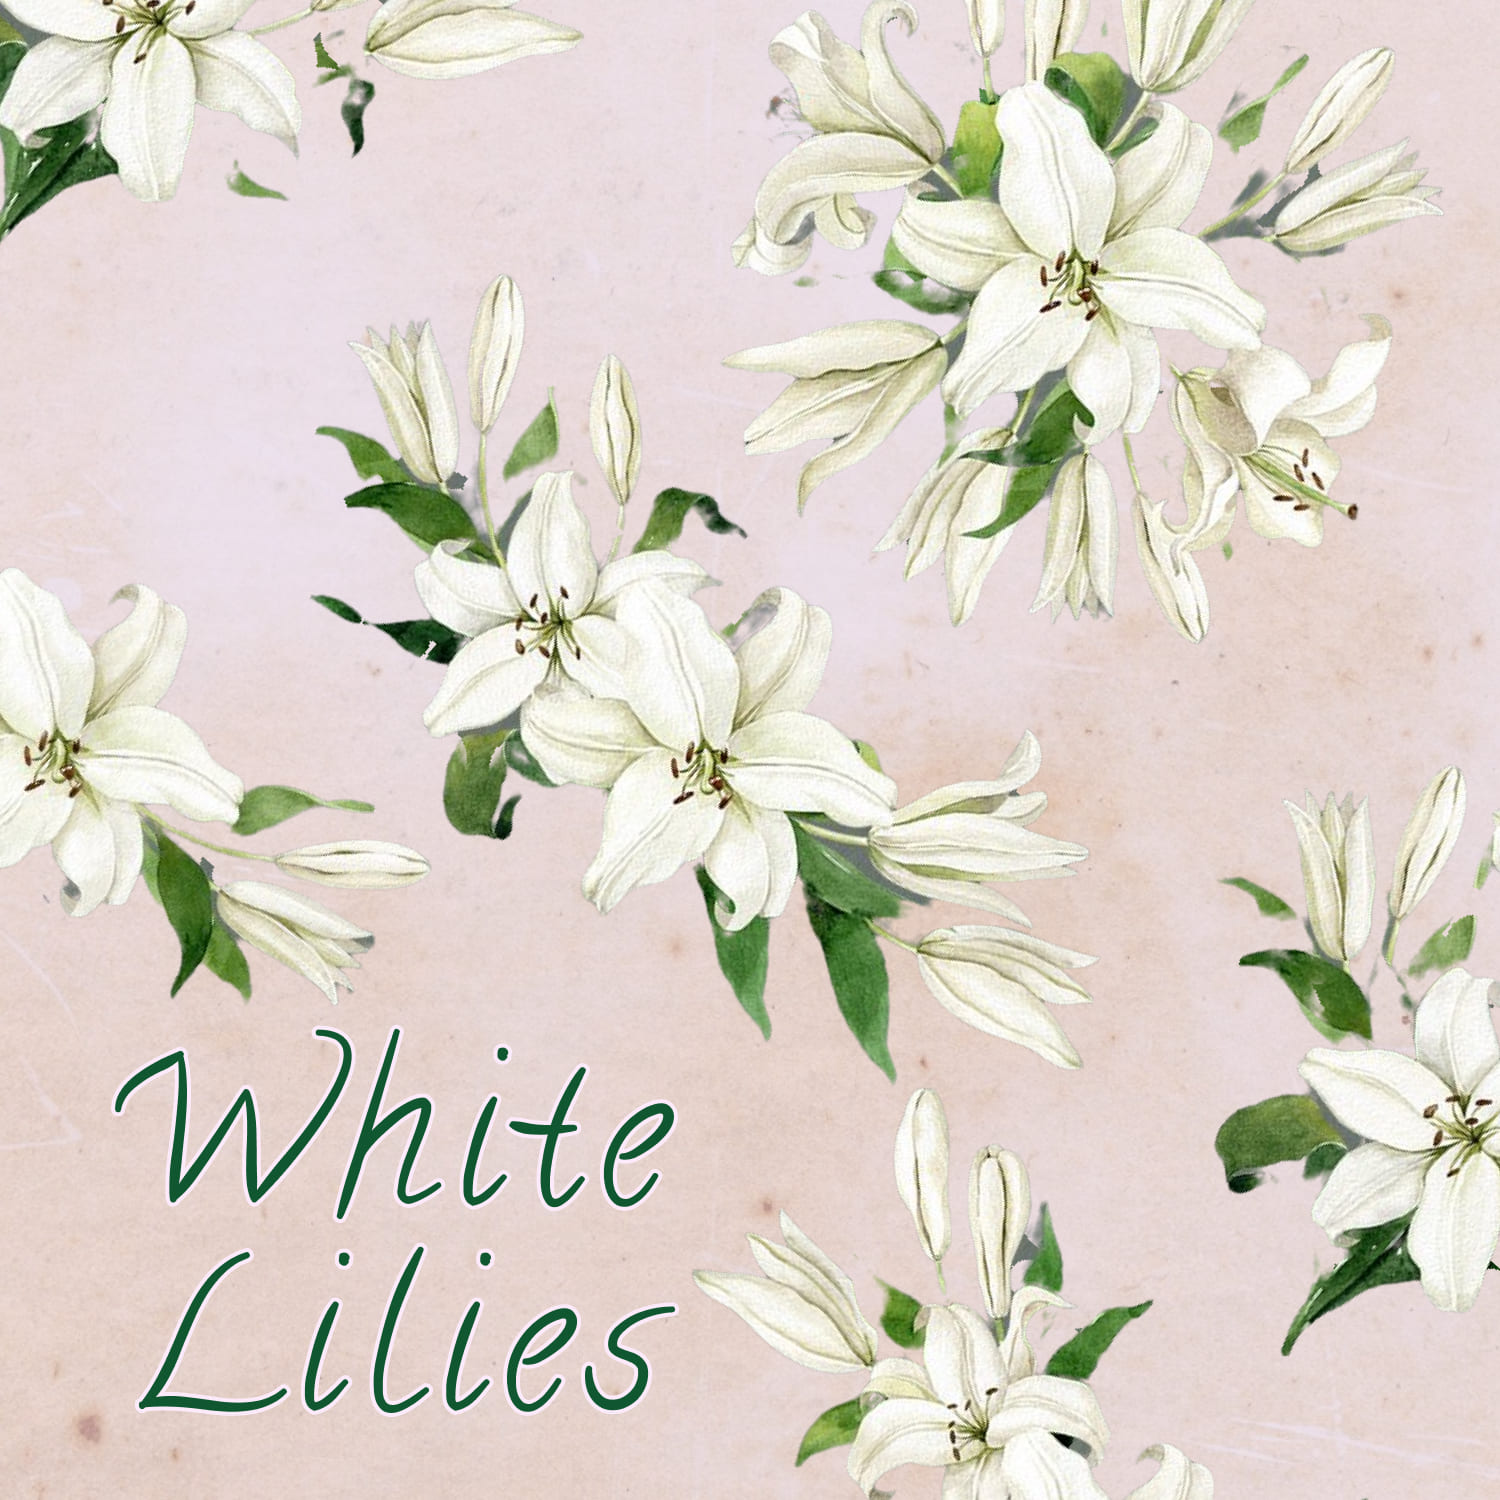 Graceful white lilies are 100% original hand painted watercolor elements, scanned and carefully turned into PNG digital files.